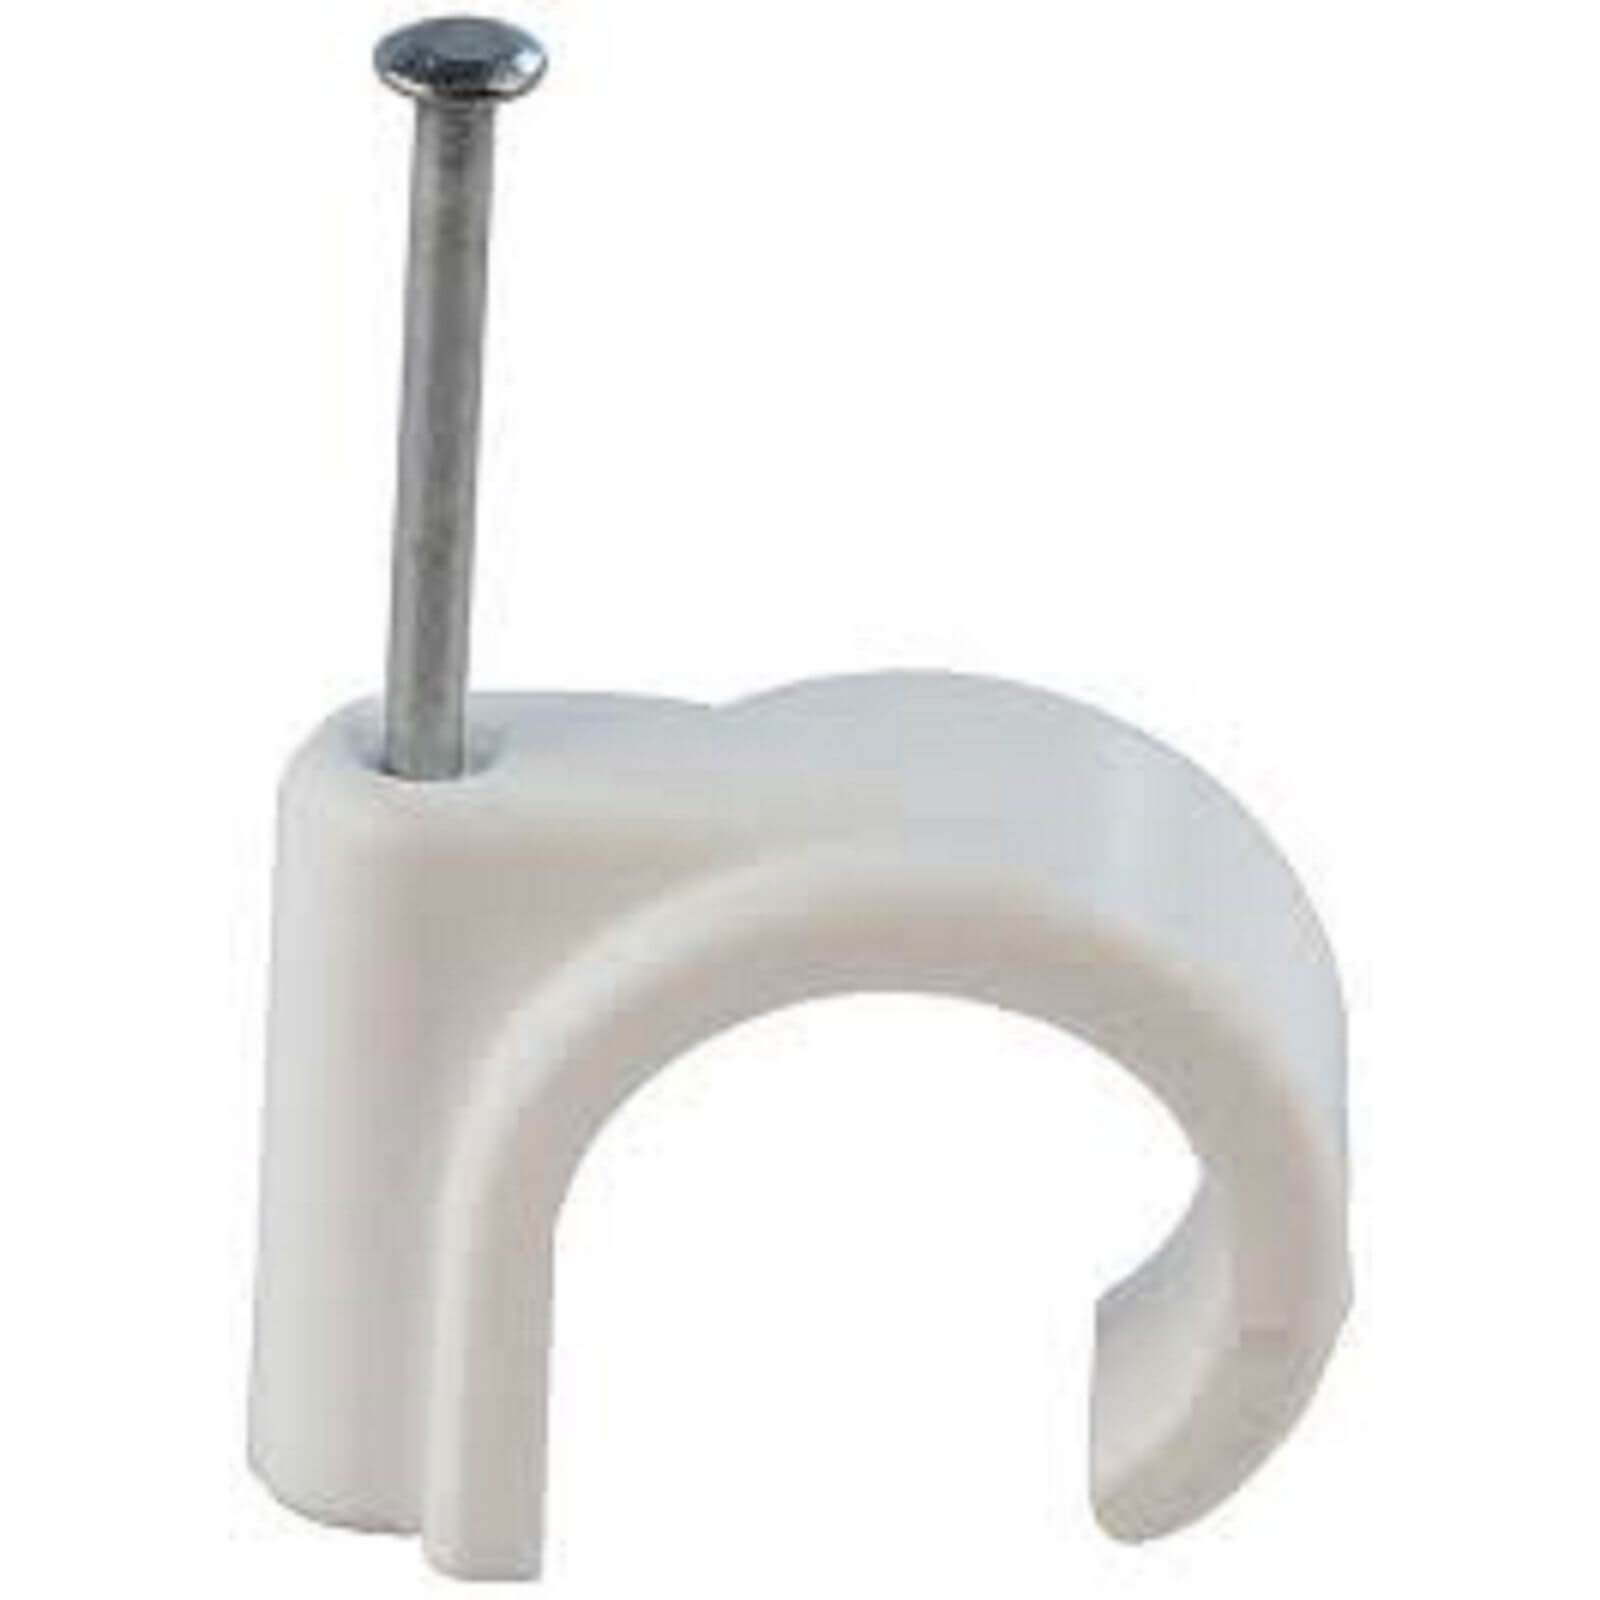 Photo of Oracstar Nail In Pipe Clips - 22mm - White - 10 Pack